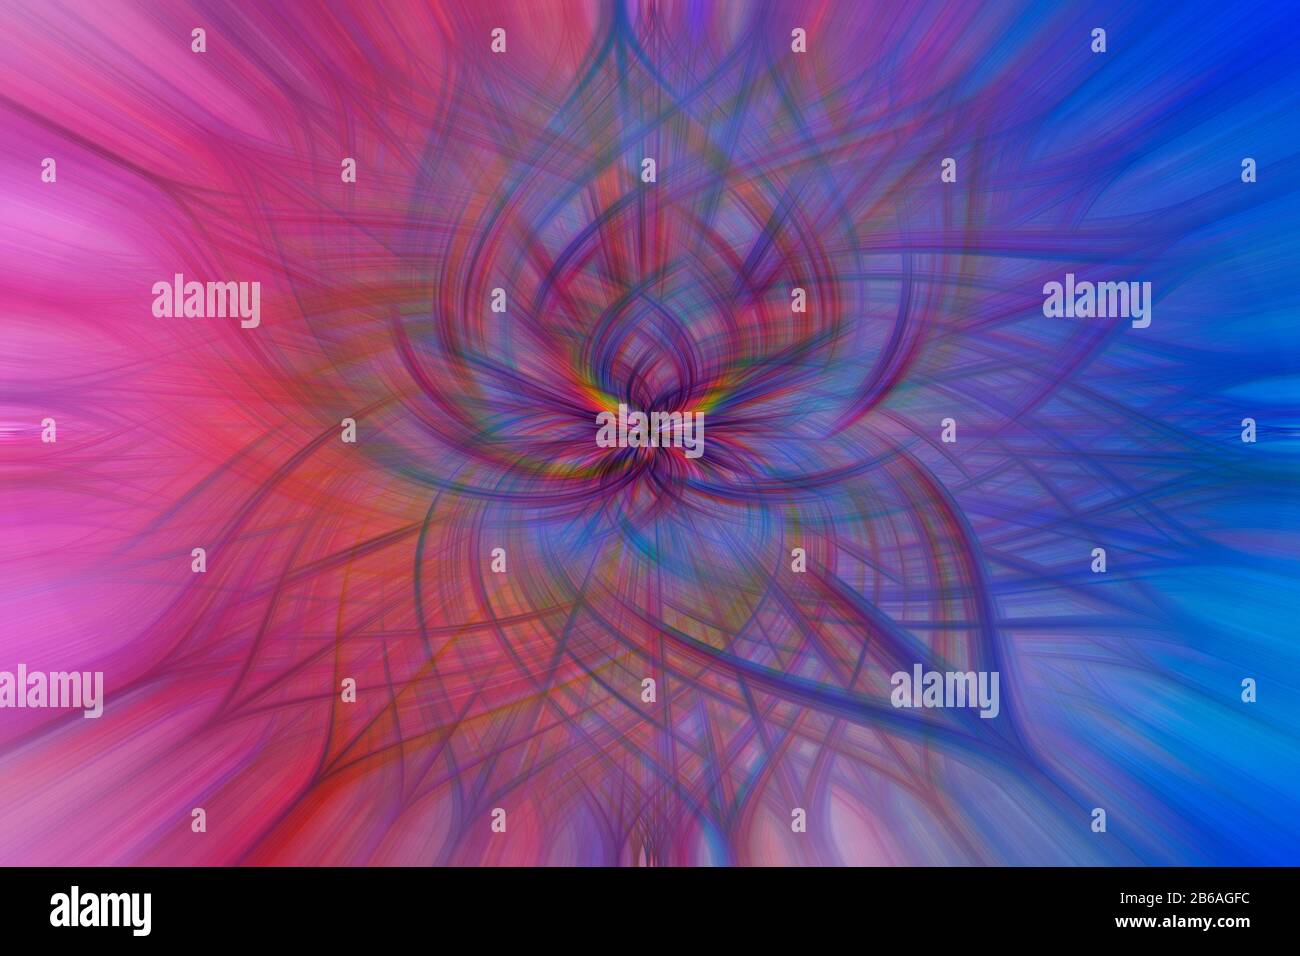 Multicoloured abstract background illustration of computer generated futuristic fractal art flower design. Stock Photo